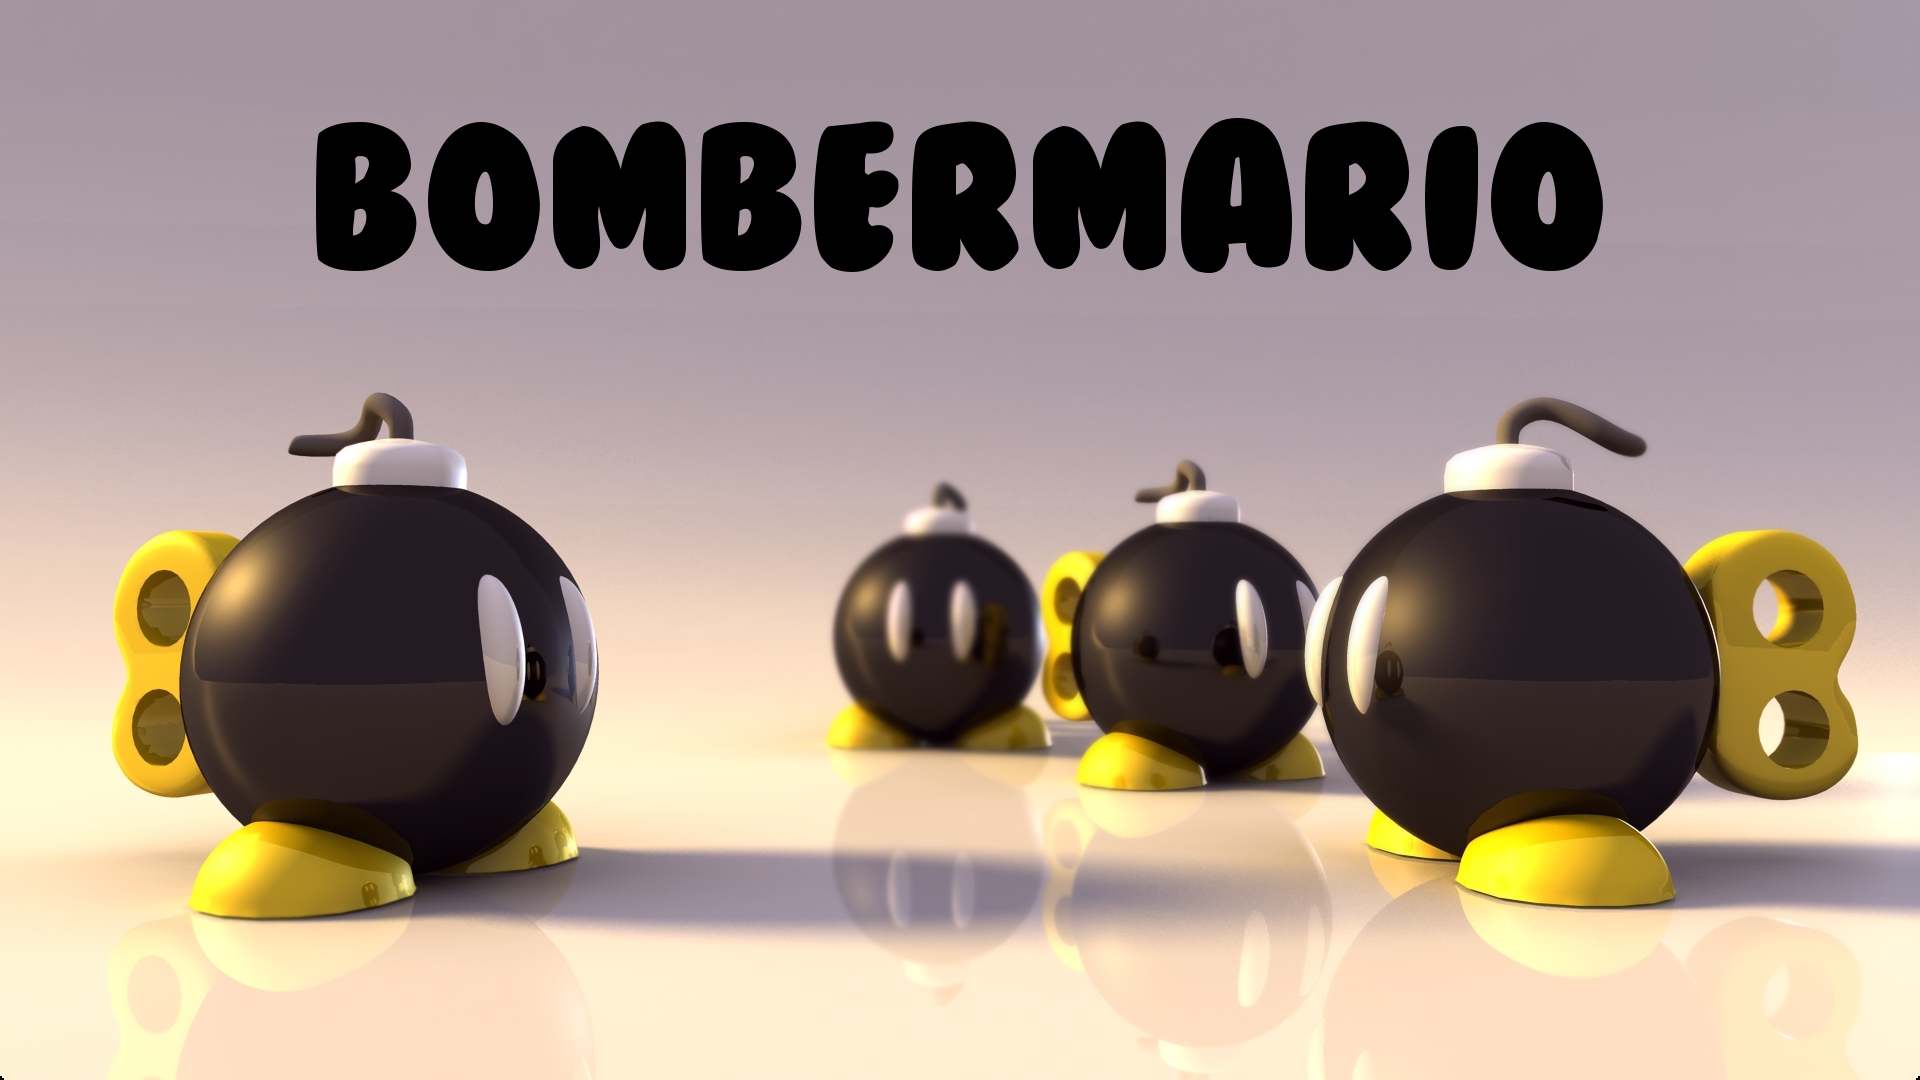 BomberMario, a first explosive project !